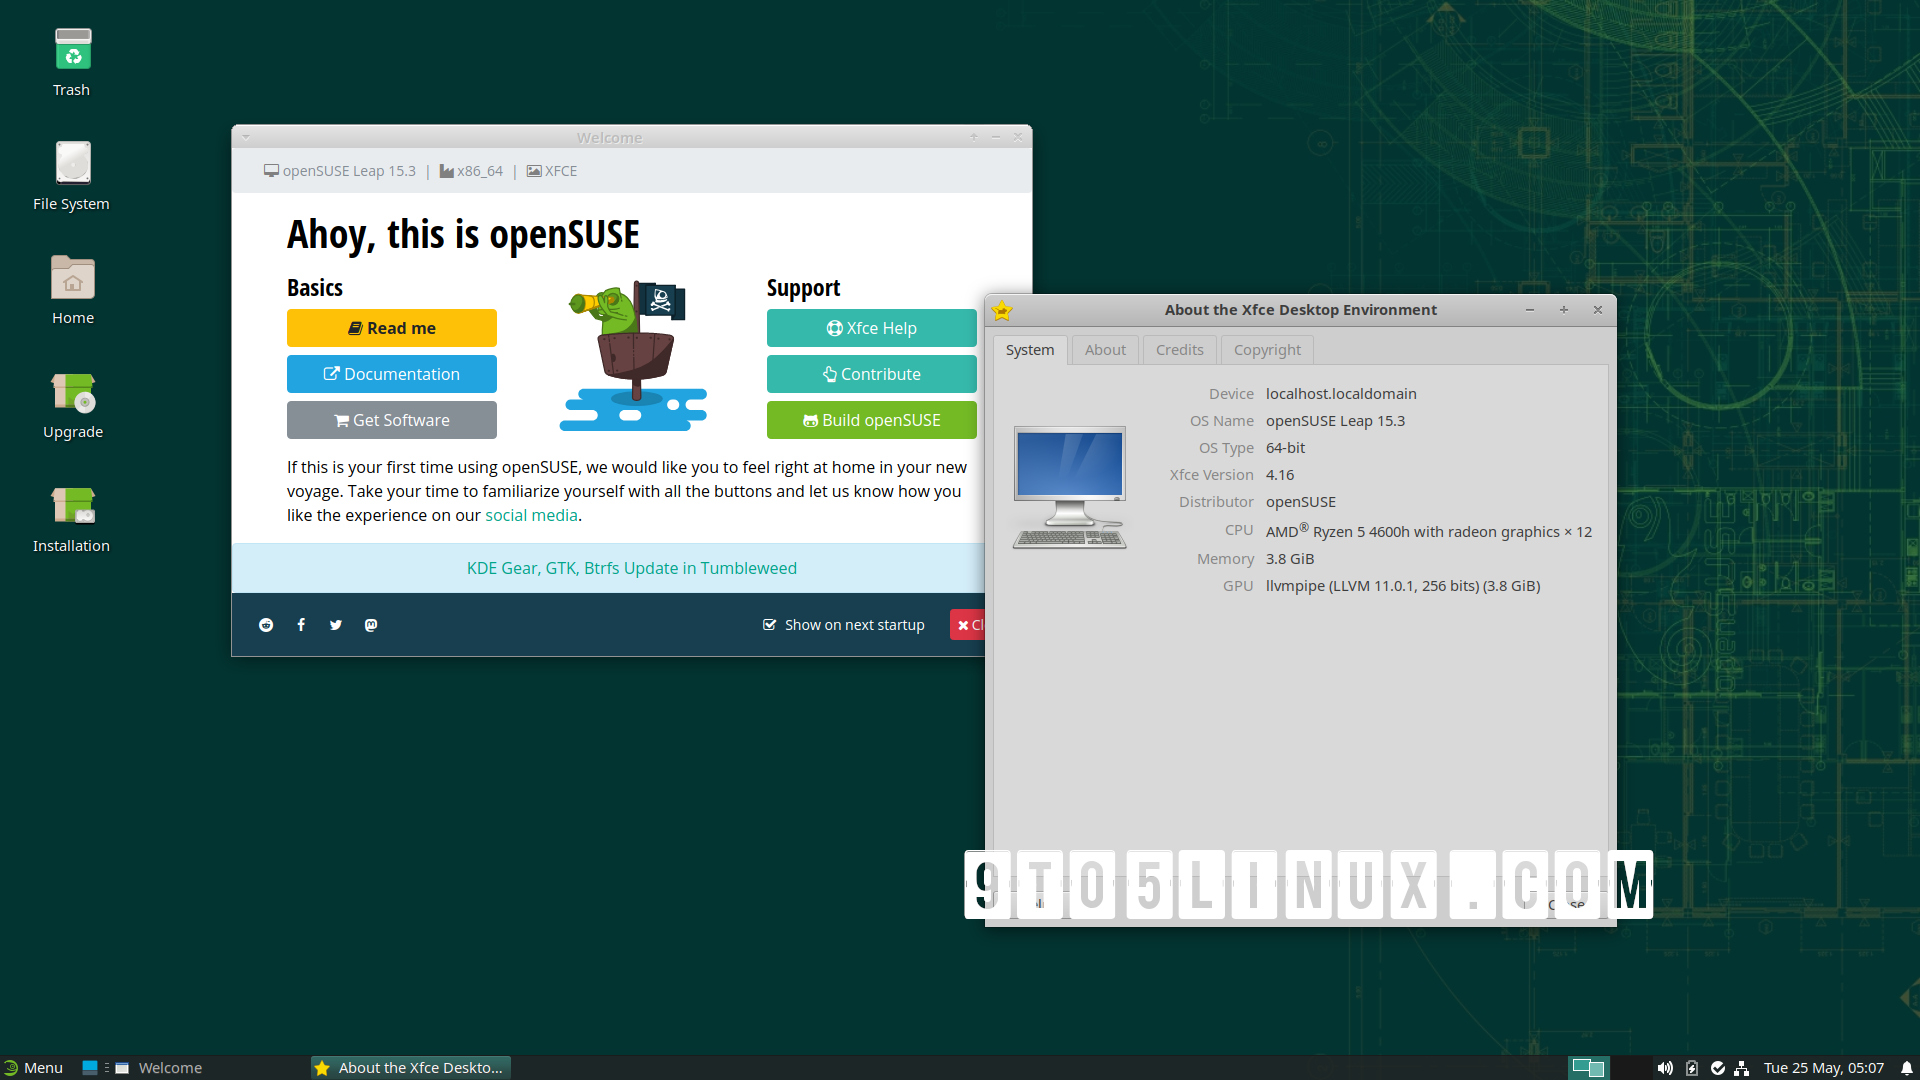 openSUSE Leap 15.3 Officially Released with Xfce 4.16, Sway Tiling WM for Wayland, and More